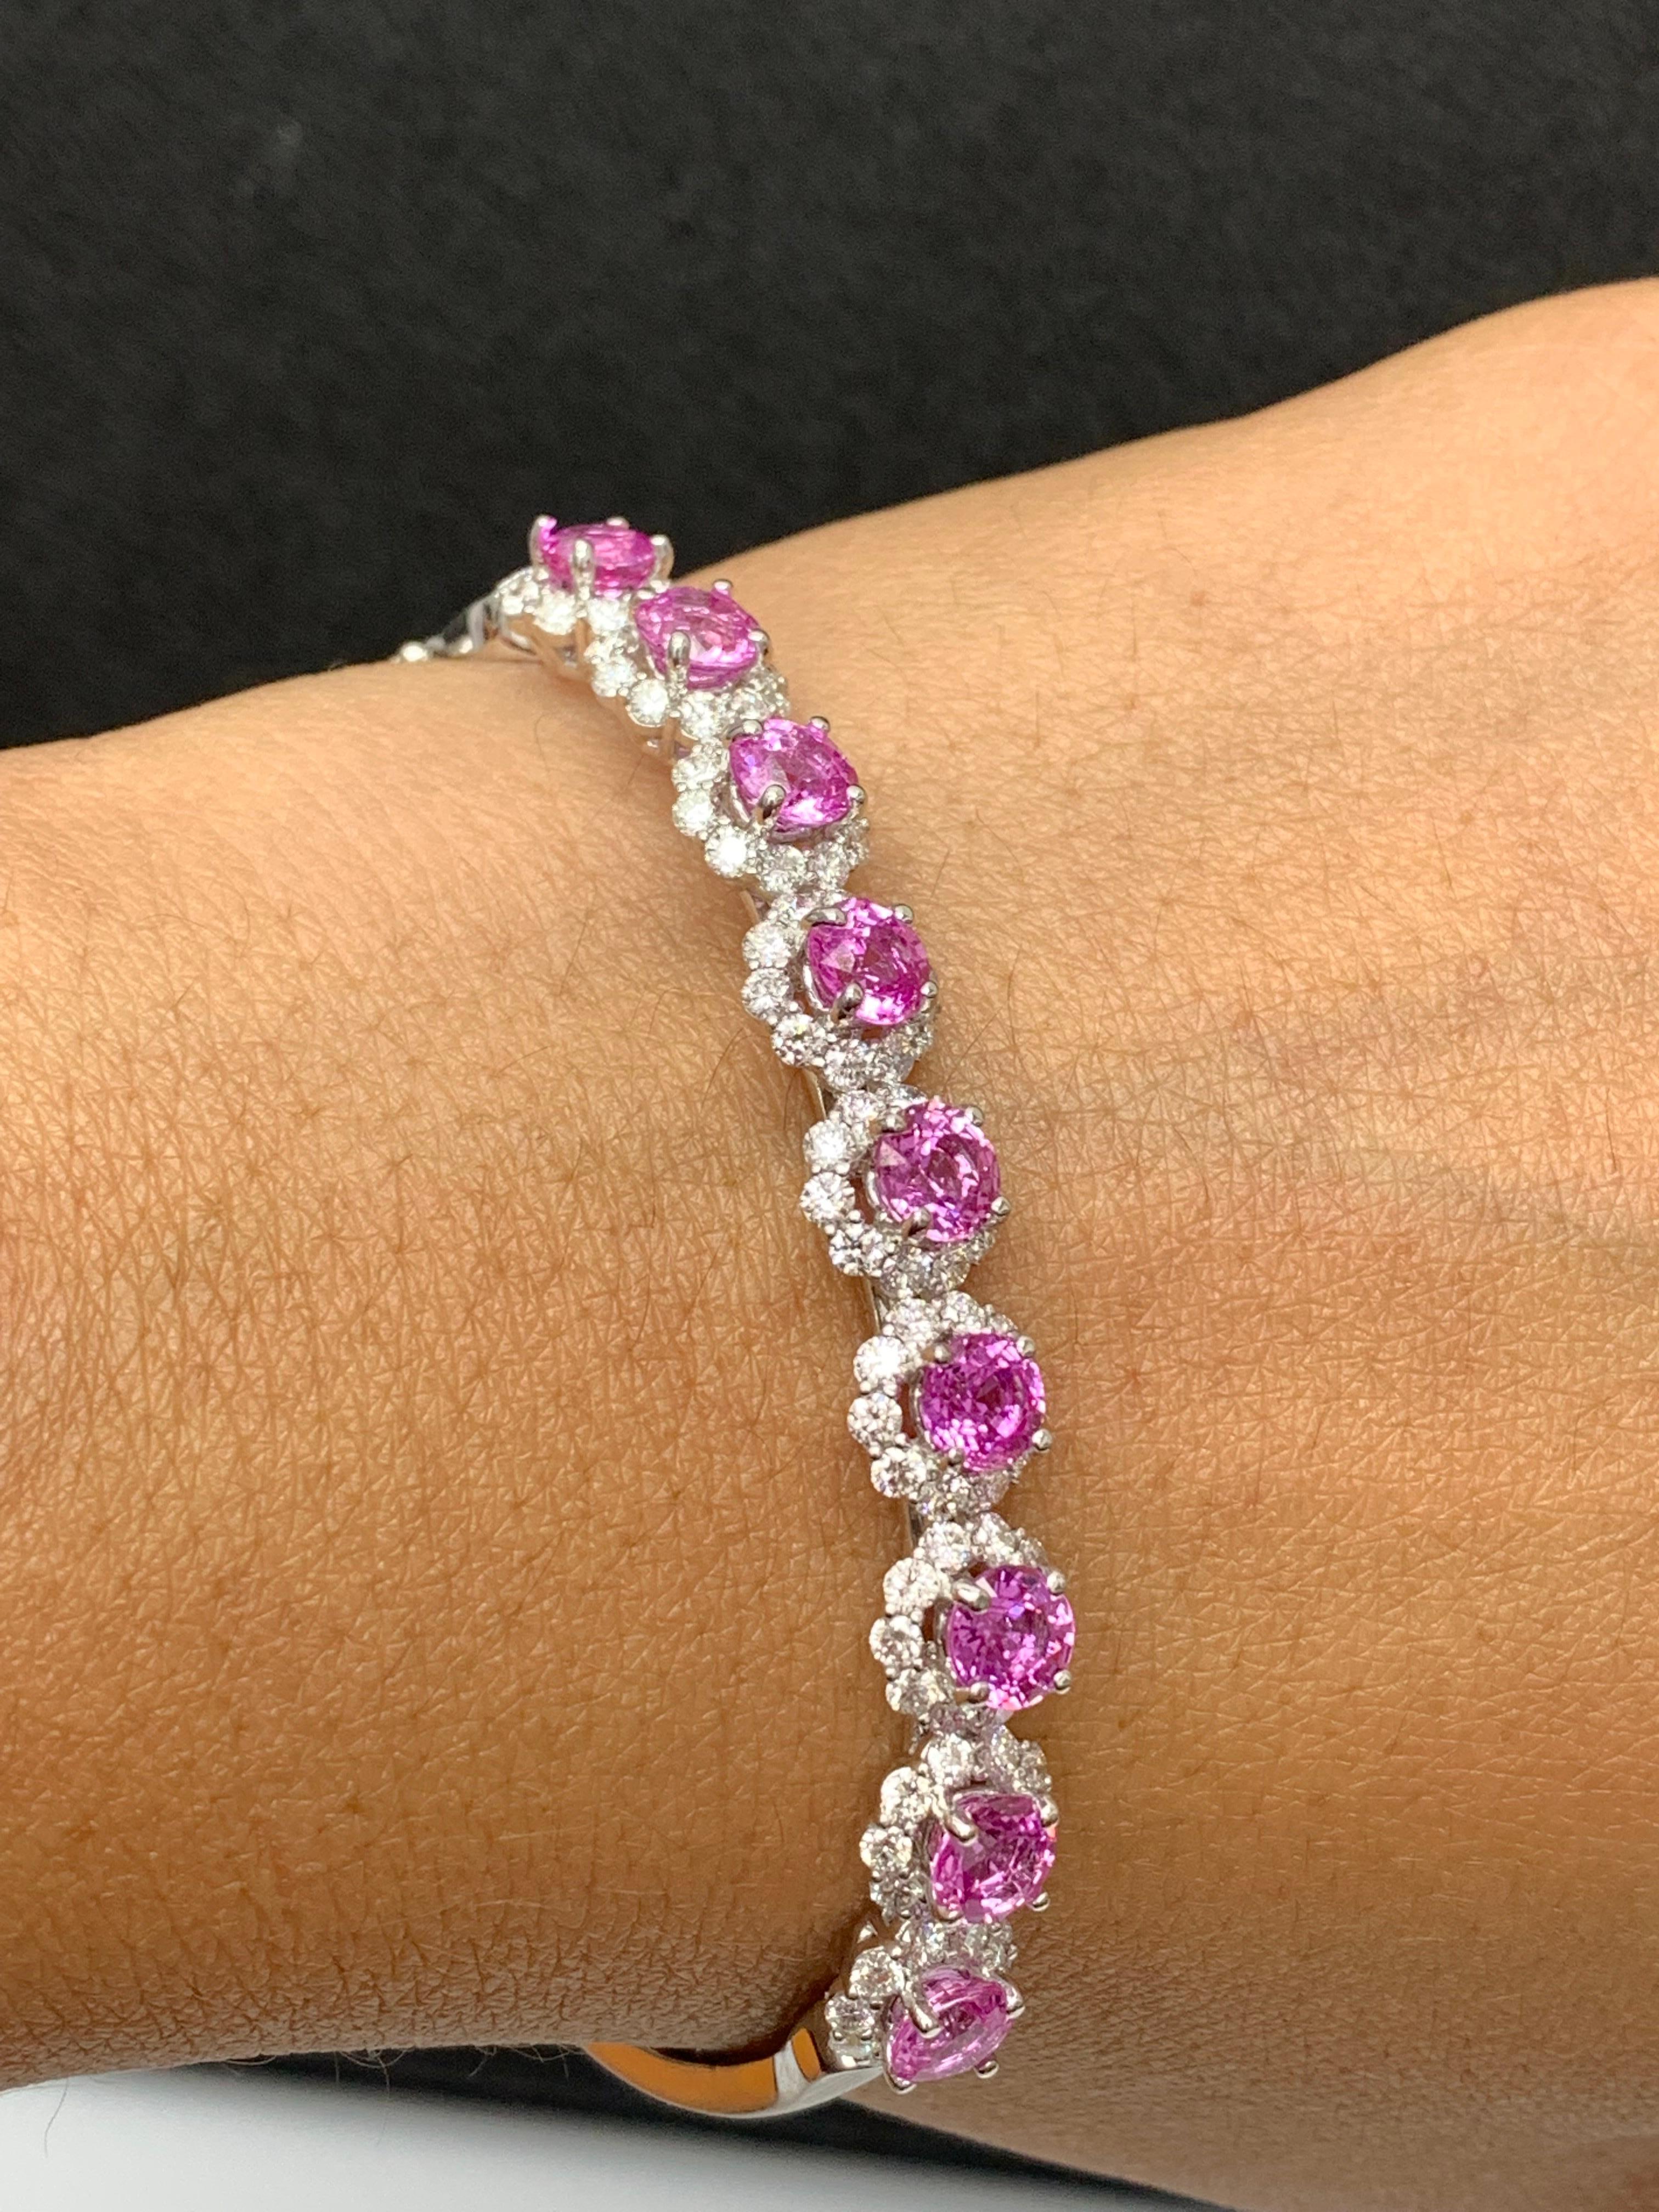 Sparkle in the spotlight with this brilliant cut pink sapphire and diamond bangle bracelet. Features 9 brilliant-cut round pink sapphires weighing 5.82 carat and surrounding the pink sapphires are 90 diamonds weighing 2.45 carat elegantly set in a